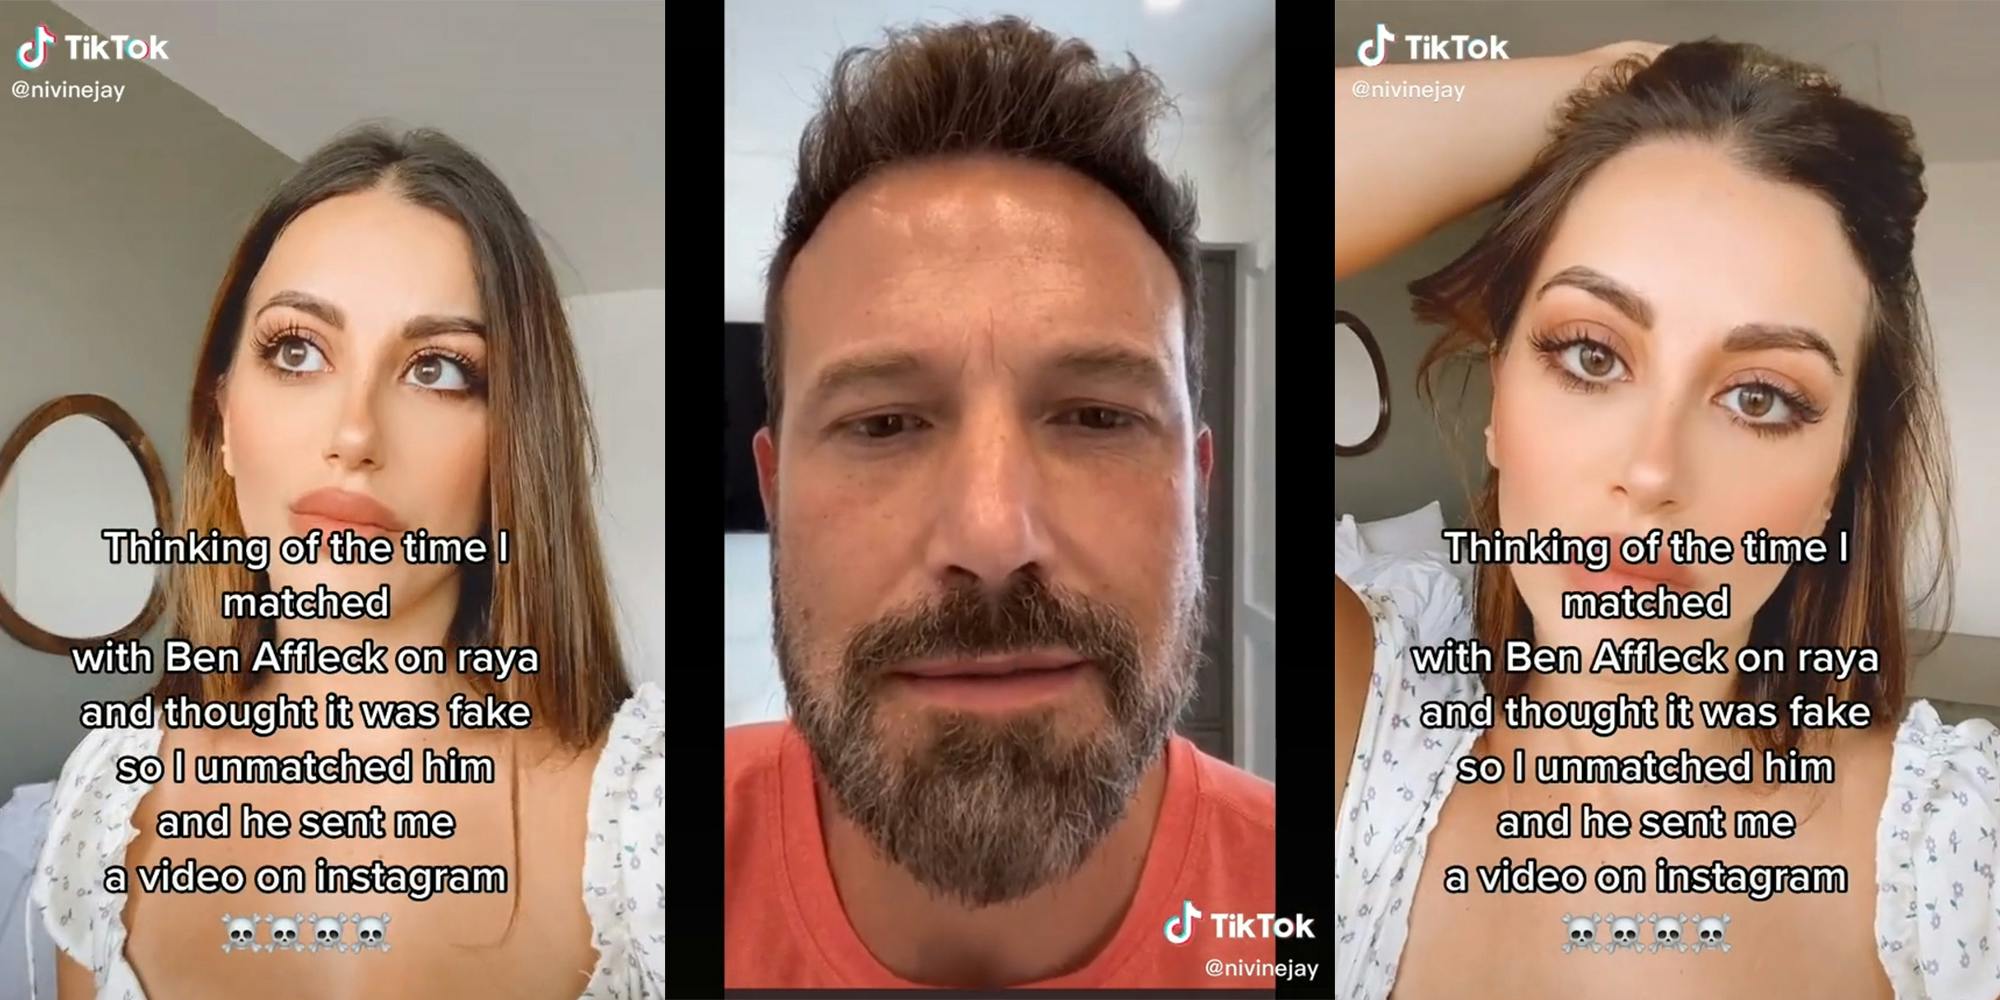 woman with "thinking of the time I matched with Ben Affleck on raya and thought it was fake so I unmatched him and he sent me a video on instagram" with emoji skulls (left and right) ben affleck (center)